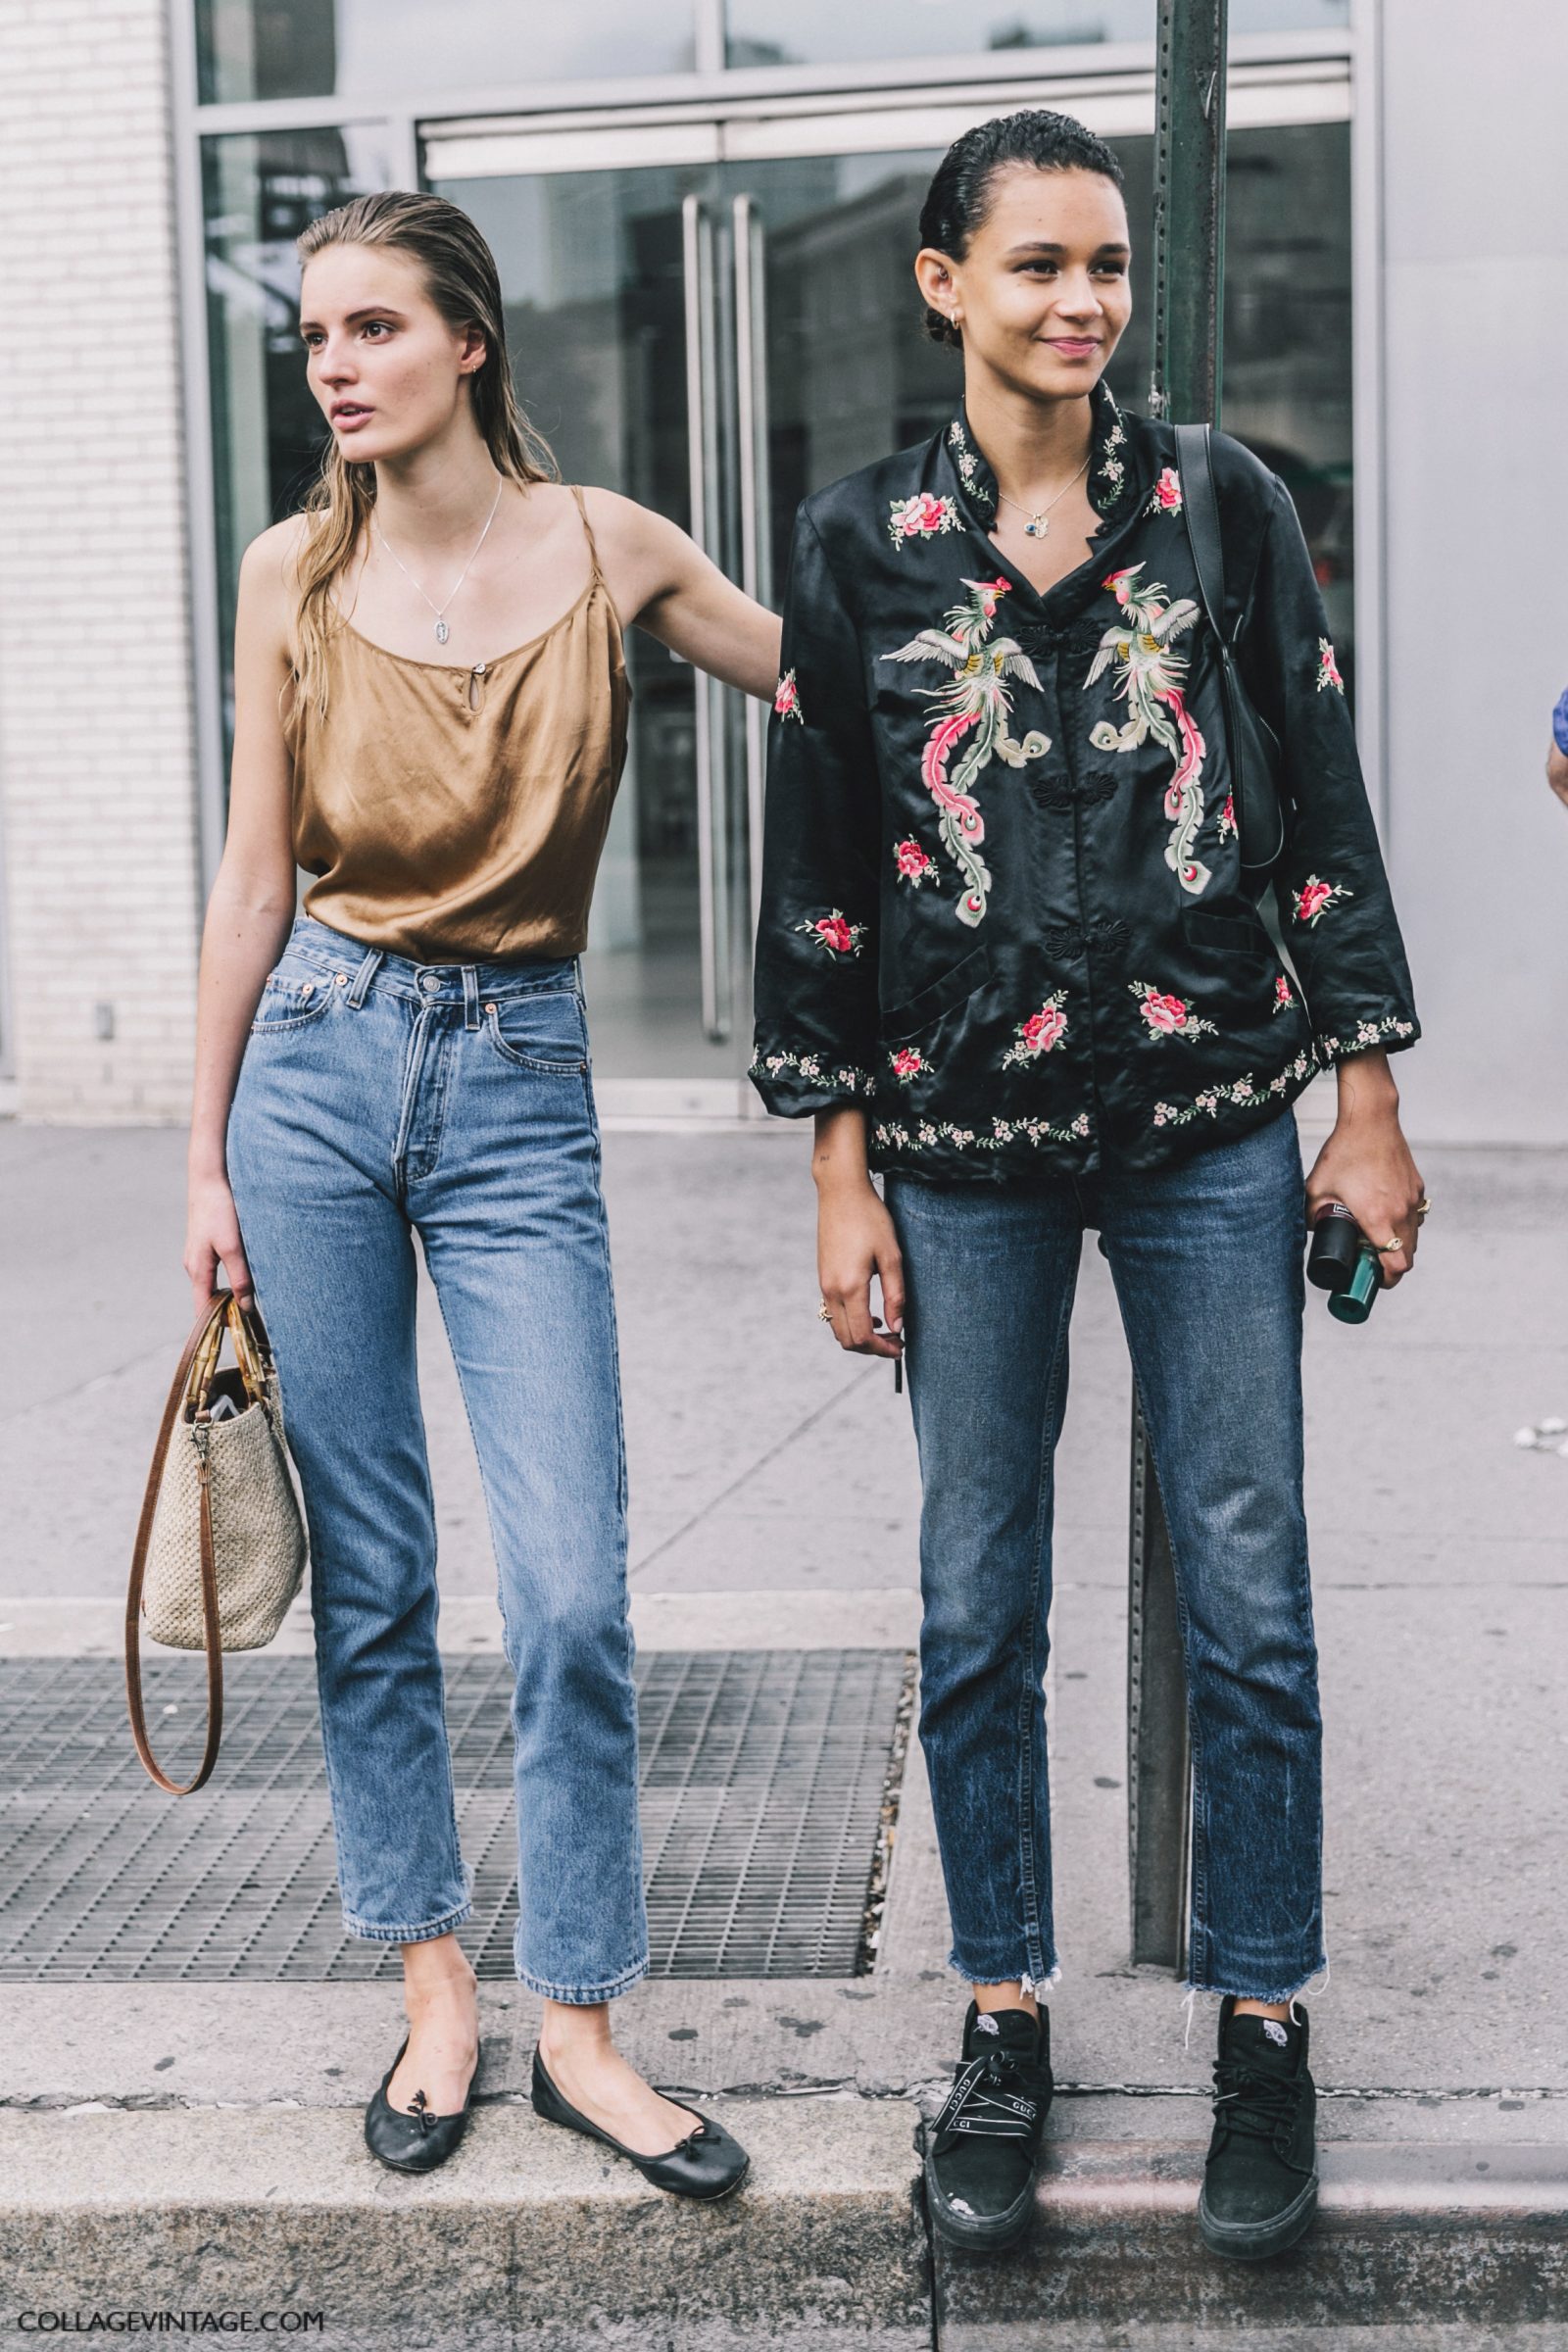 nyfw-new_york_fashion_week_ss17-street_style-outfits-collage_vintage-models-11